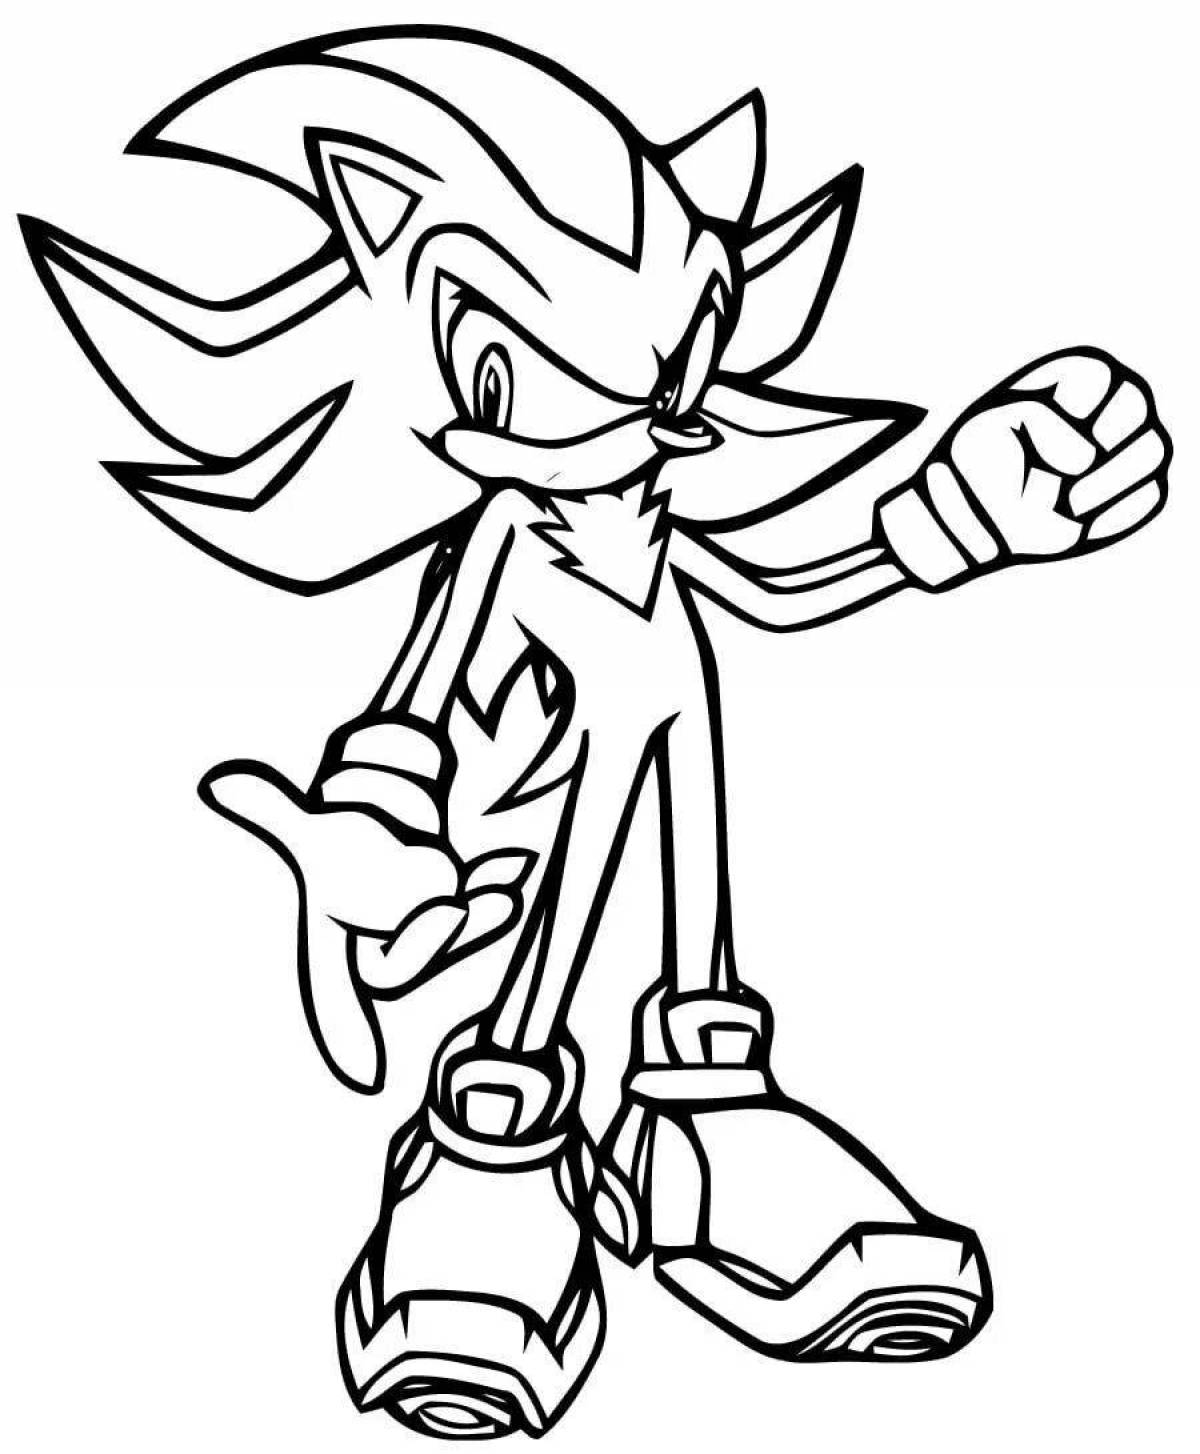 Radiant darkspine sonic coloring page